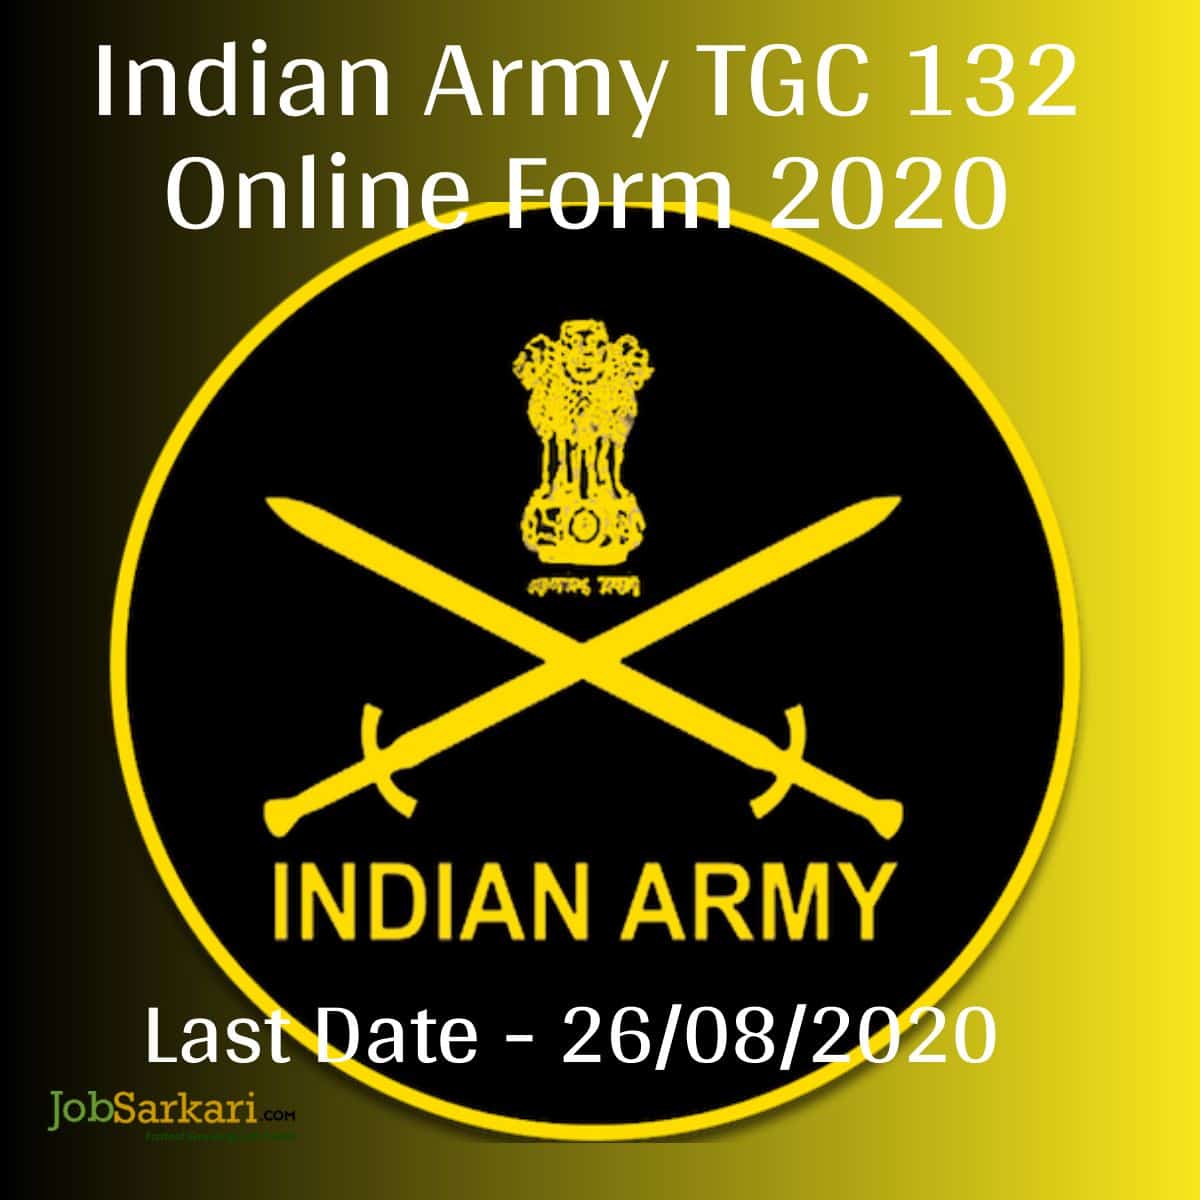 Indian Army TGC 132 Online Form 2020 1